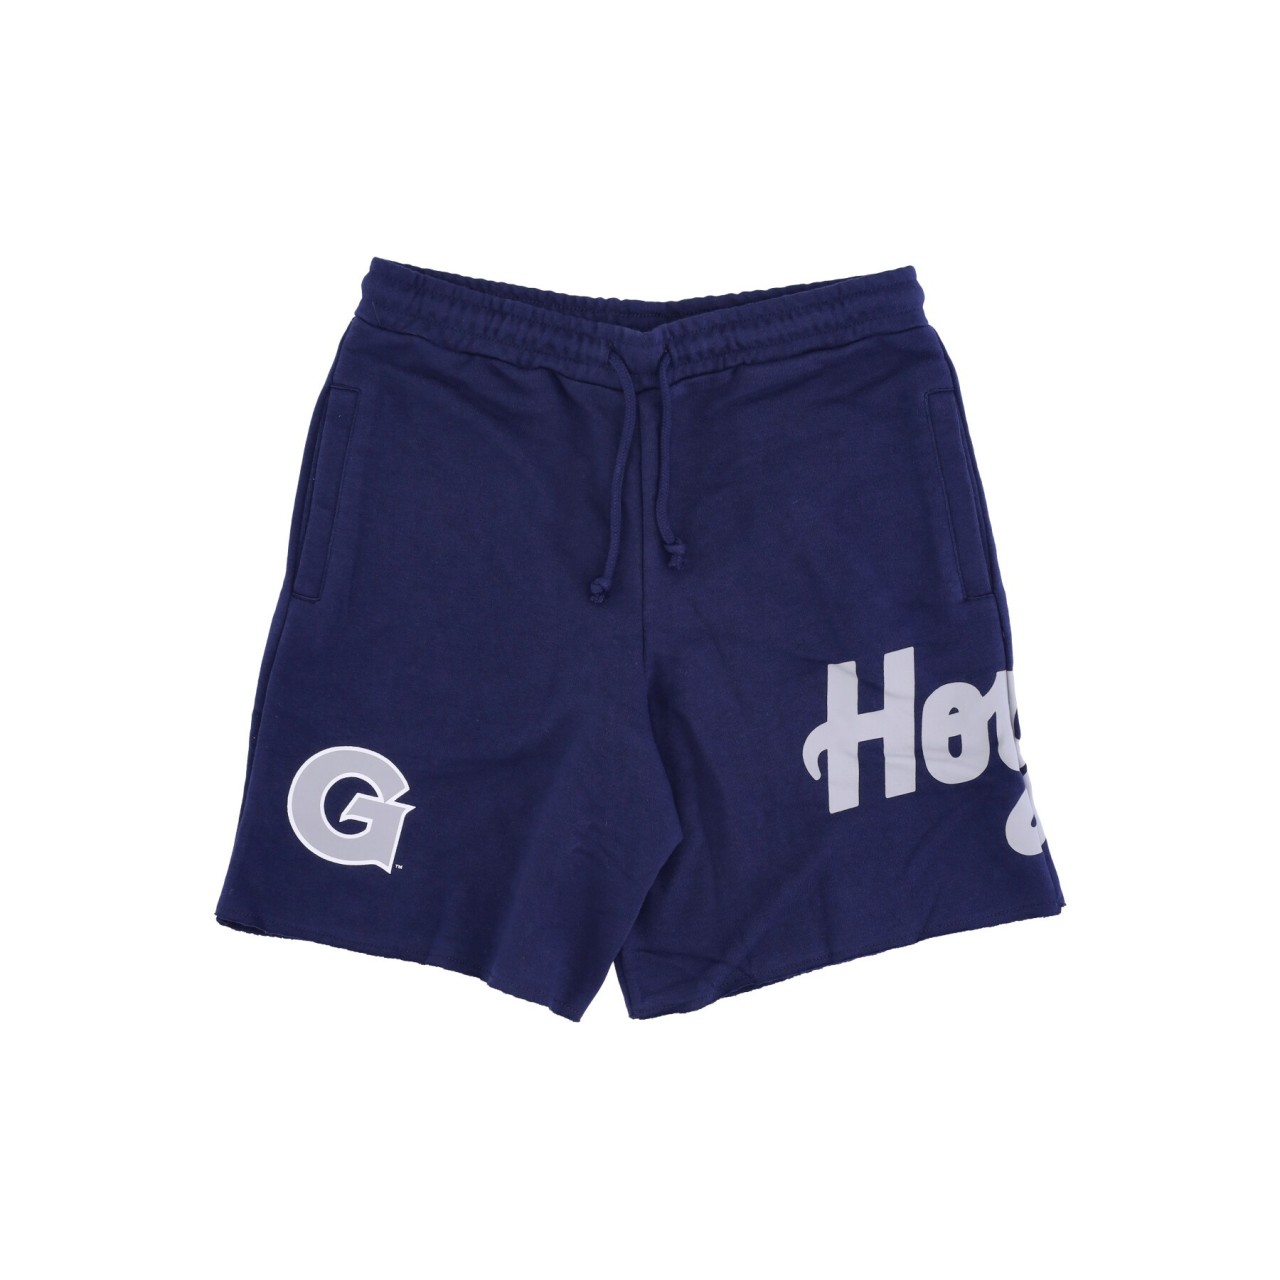 MITCHELL & NESS NCAA GAME DAY FRENCH TERRY SHORT GEOHOY SHORAJ19075-GTWNAVY